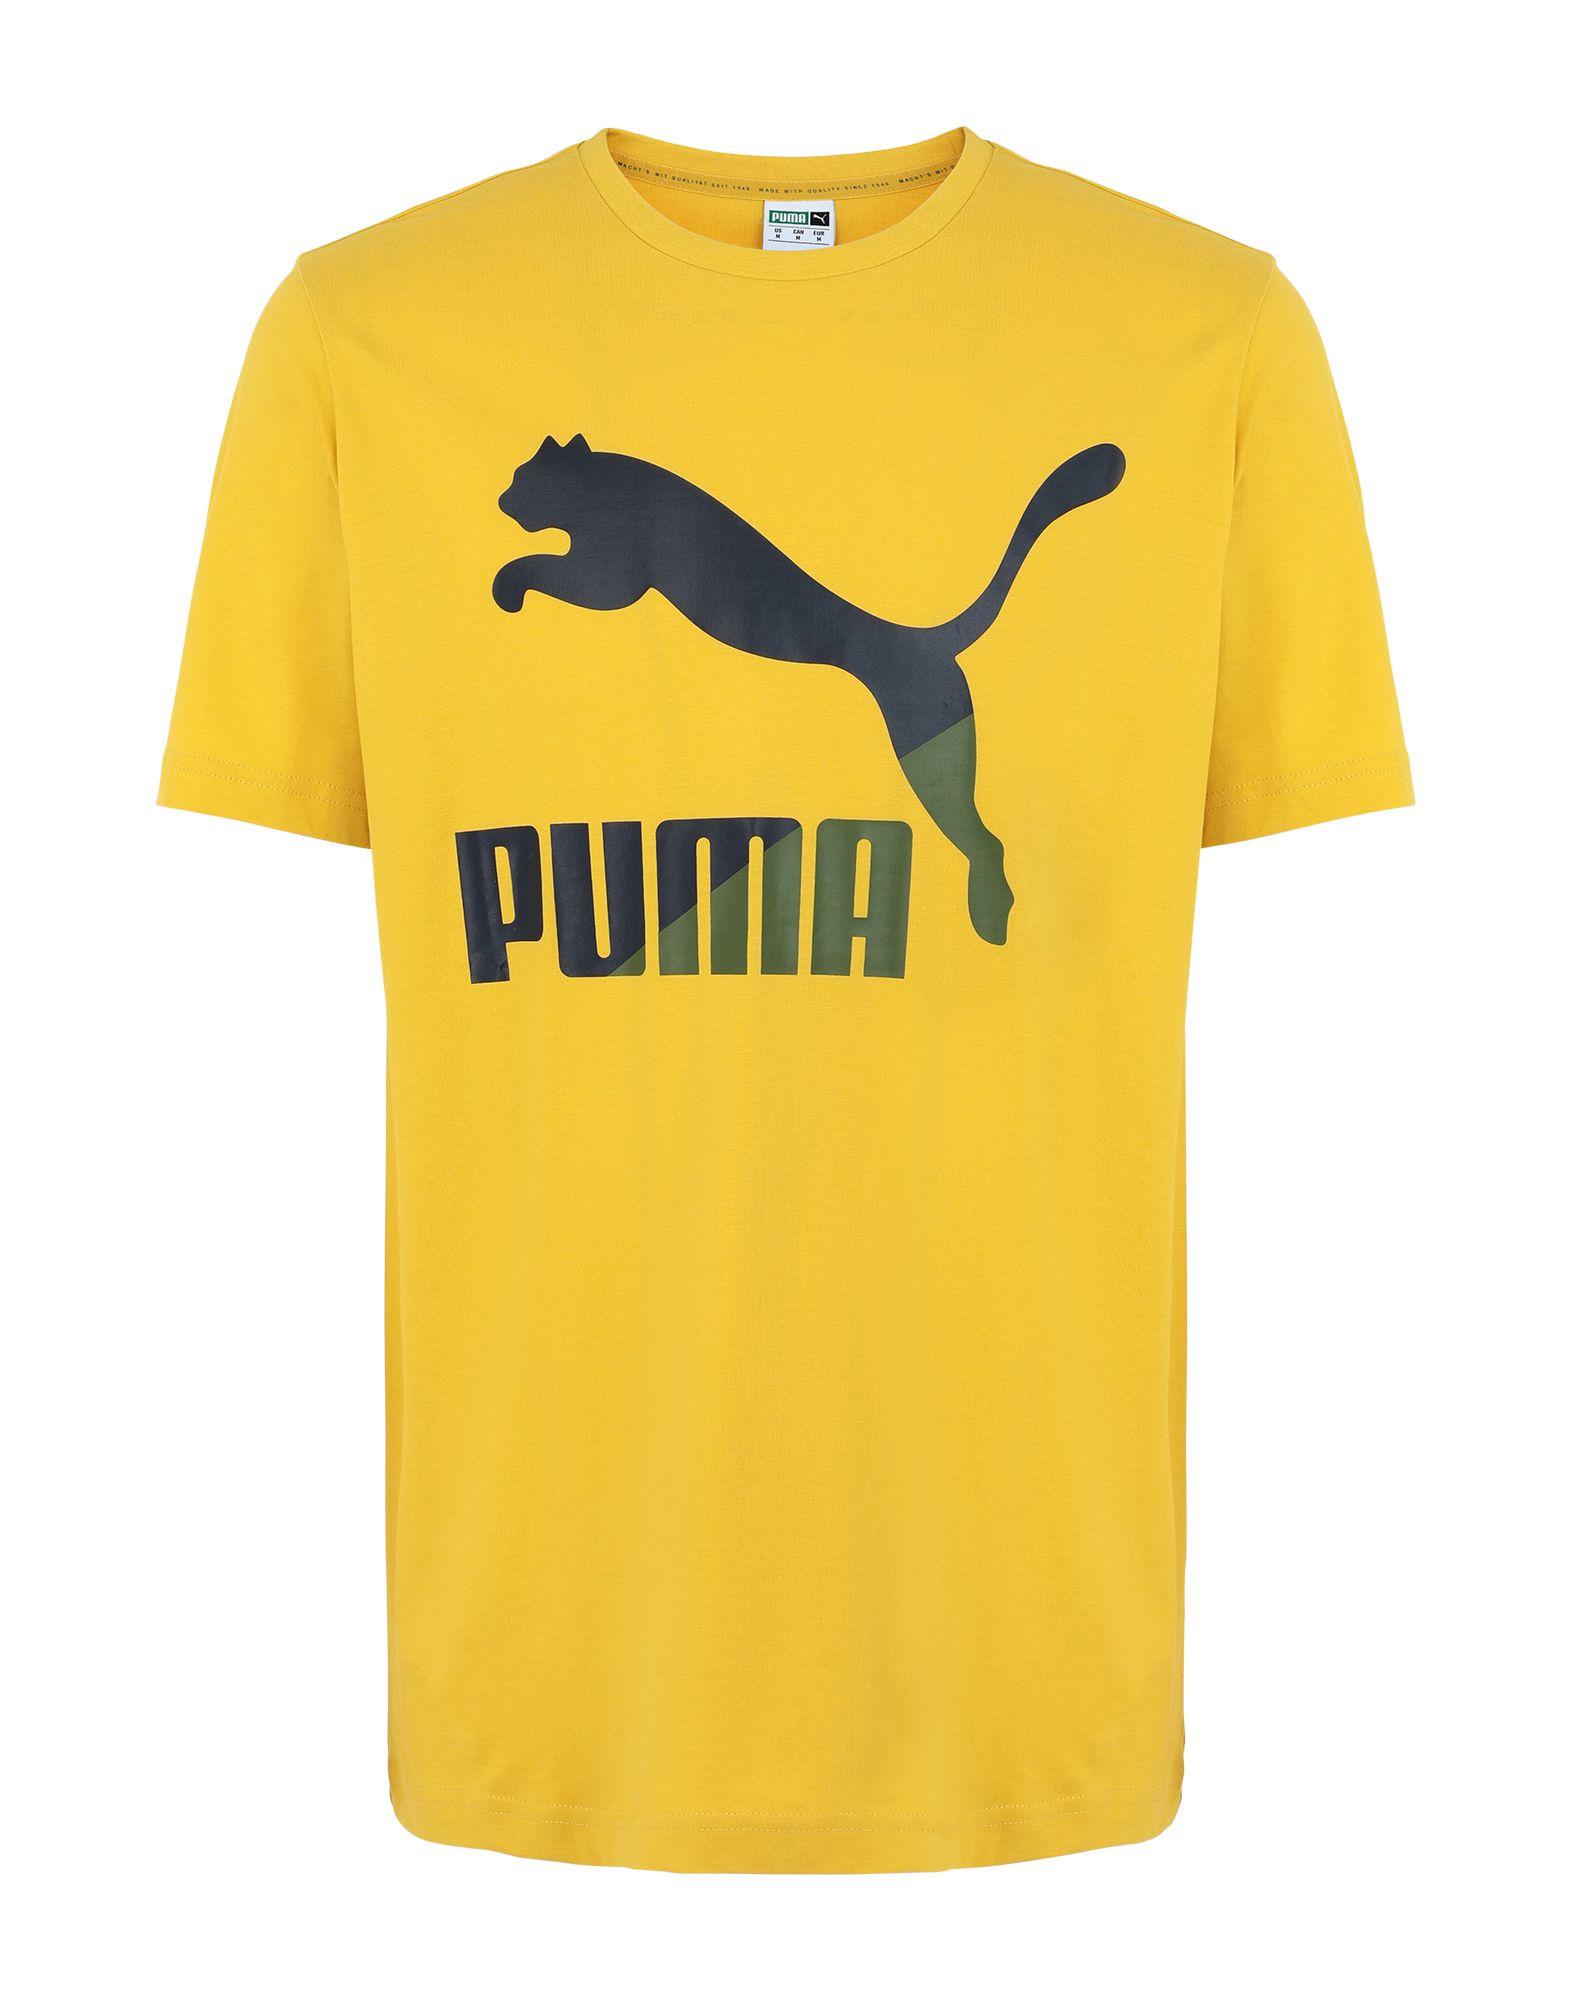 PUMA Cotton T-shirt in Yellow for Men - Lyst